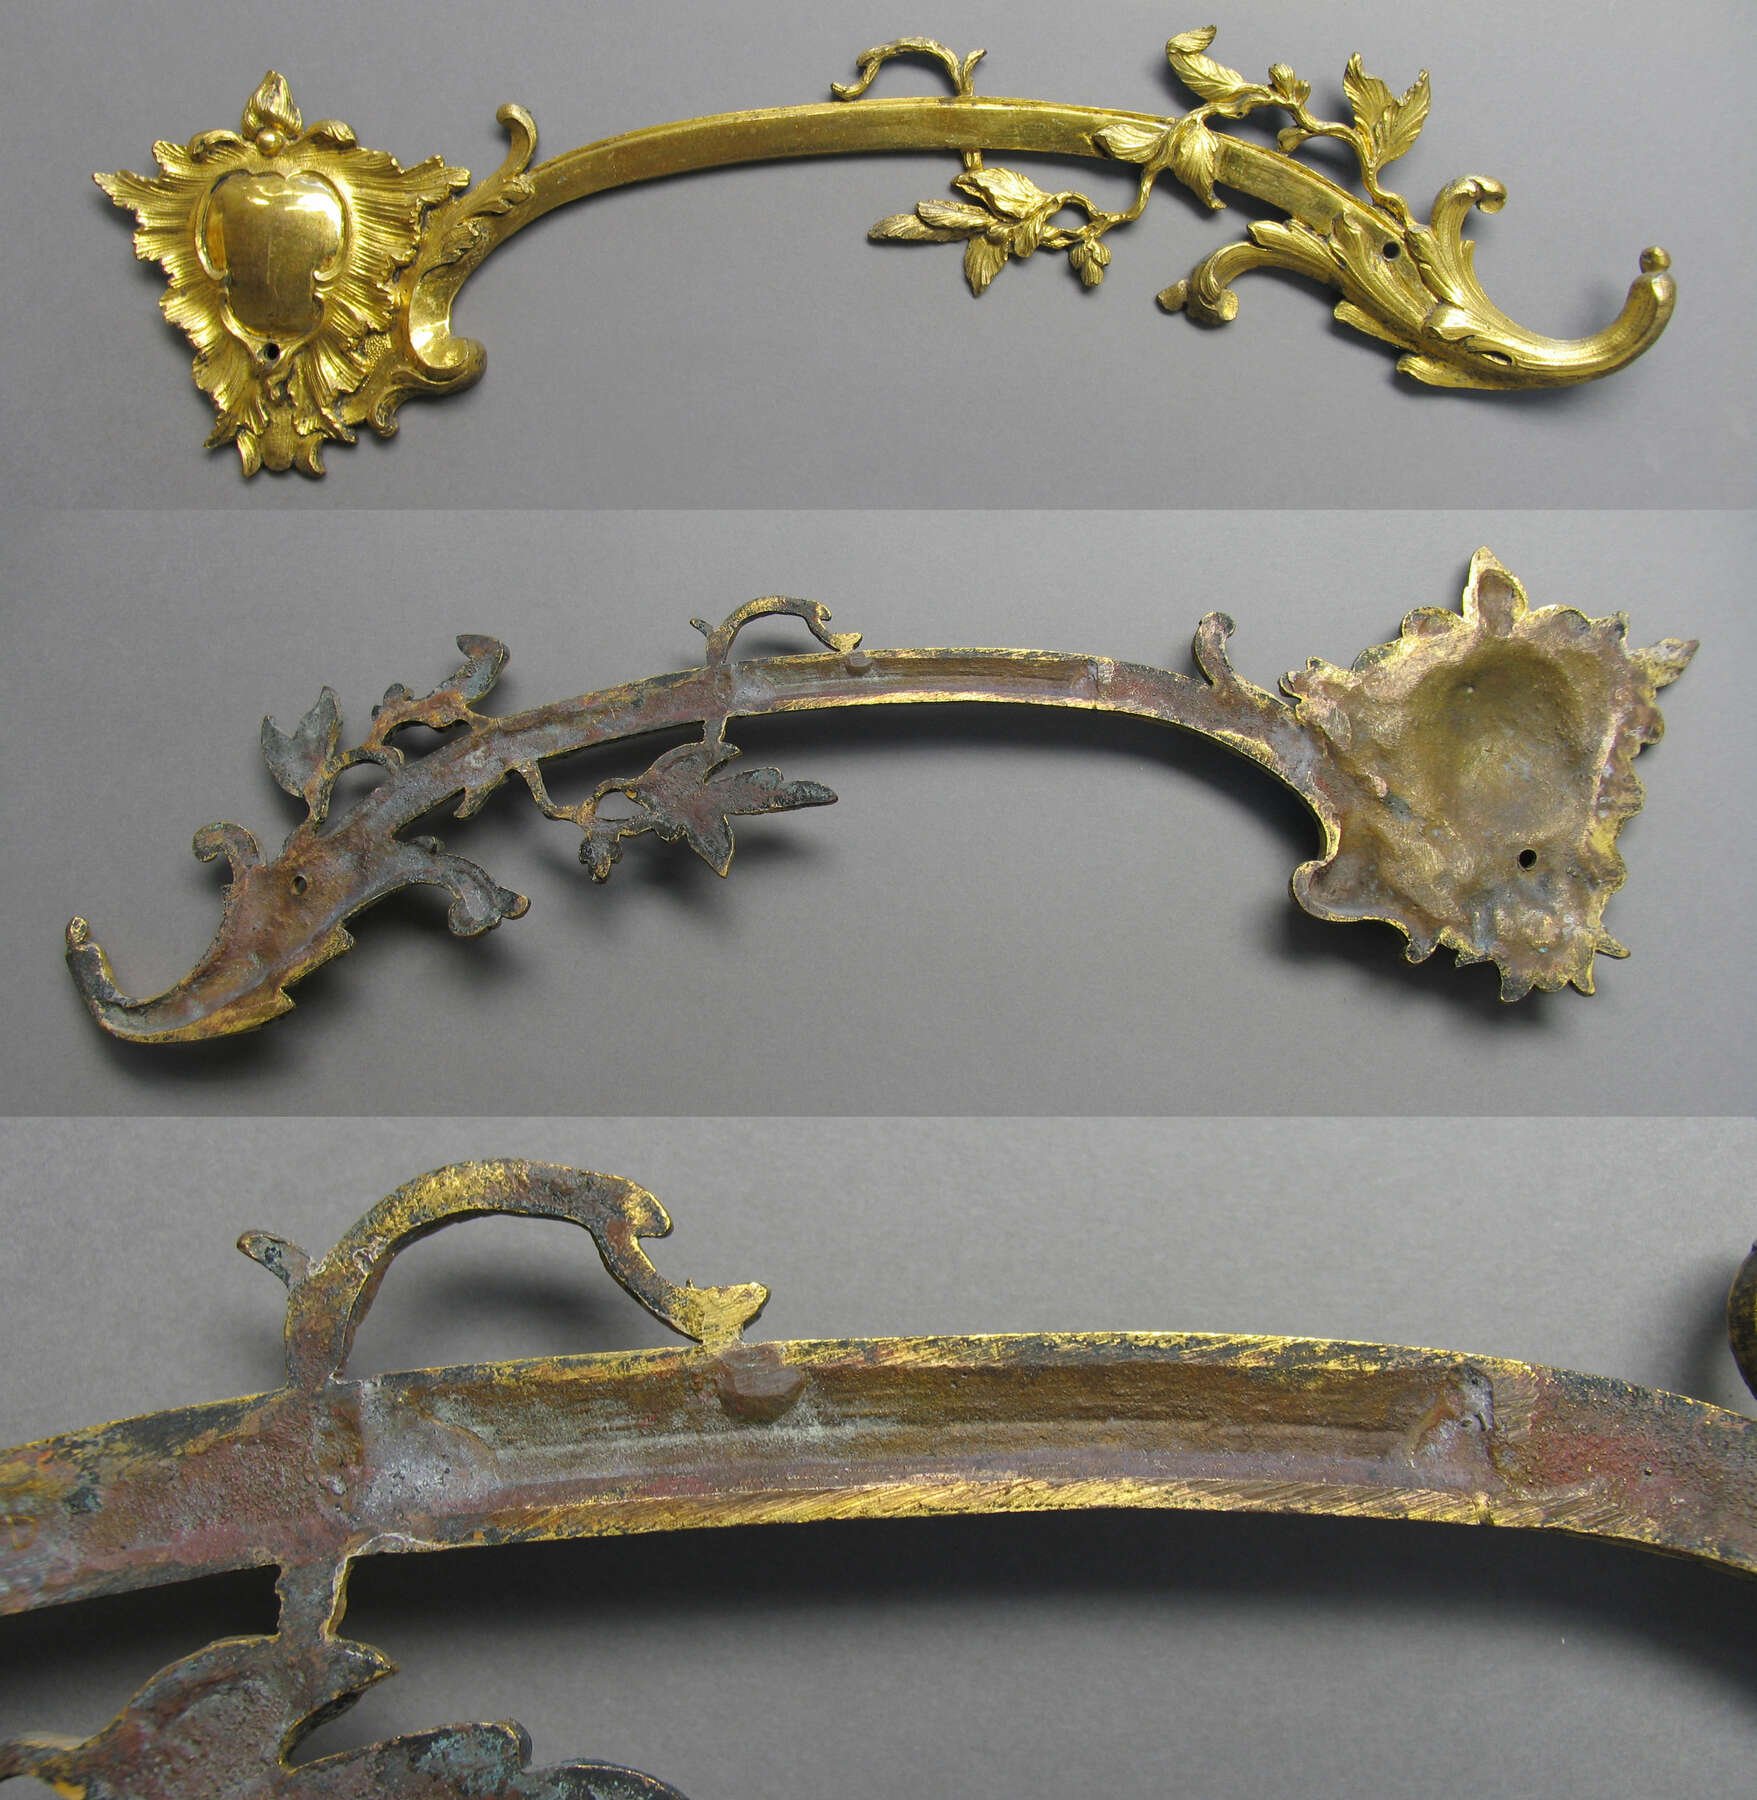 three details of one of the gilt bronze mounts from the bout de bureau: one from the front revealing the bright gilding, one from the back revealing the underlying bronze, and one zoomed-in image of the back revealing where the mount was soldered to reduce its length